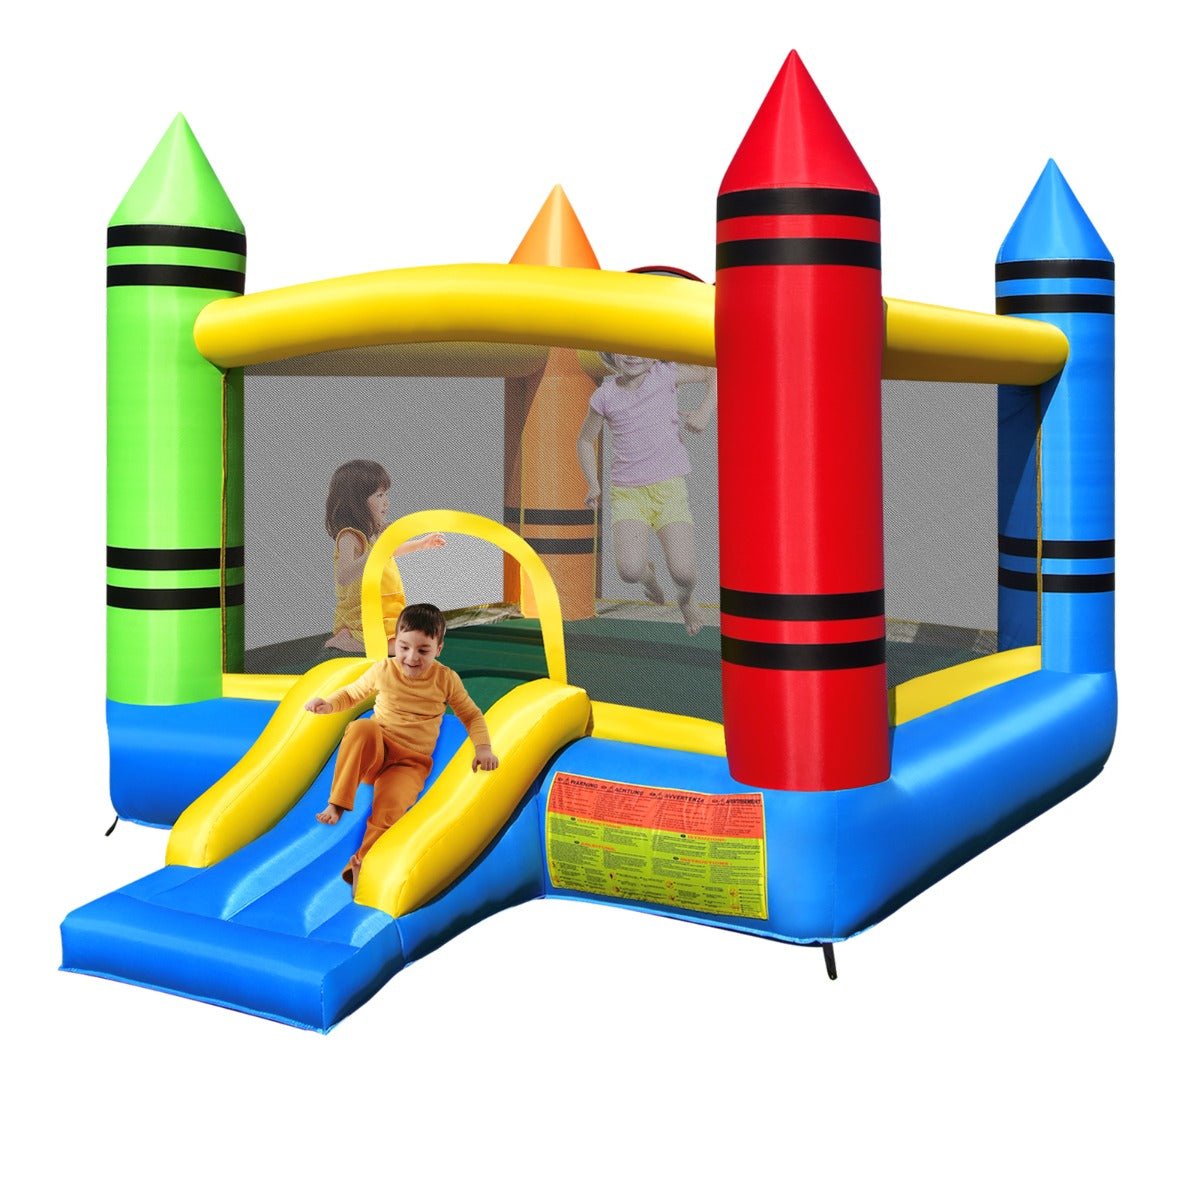 Kids Playtime Bliss: Inflatable Bounce House with Fun Slide for Endless Thrills